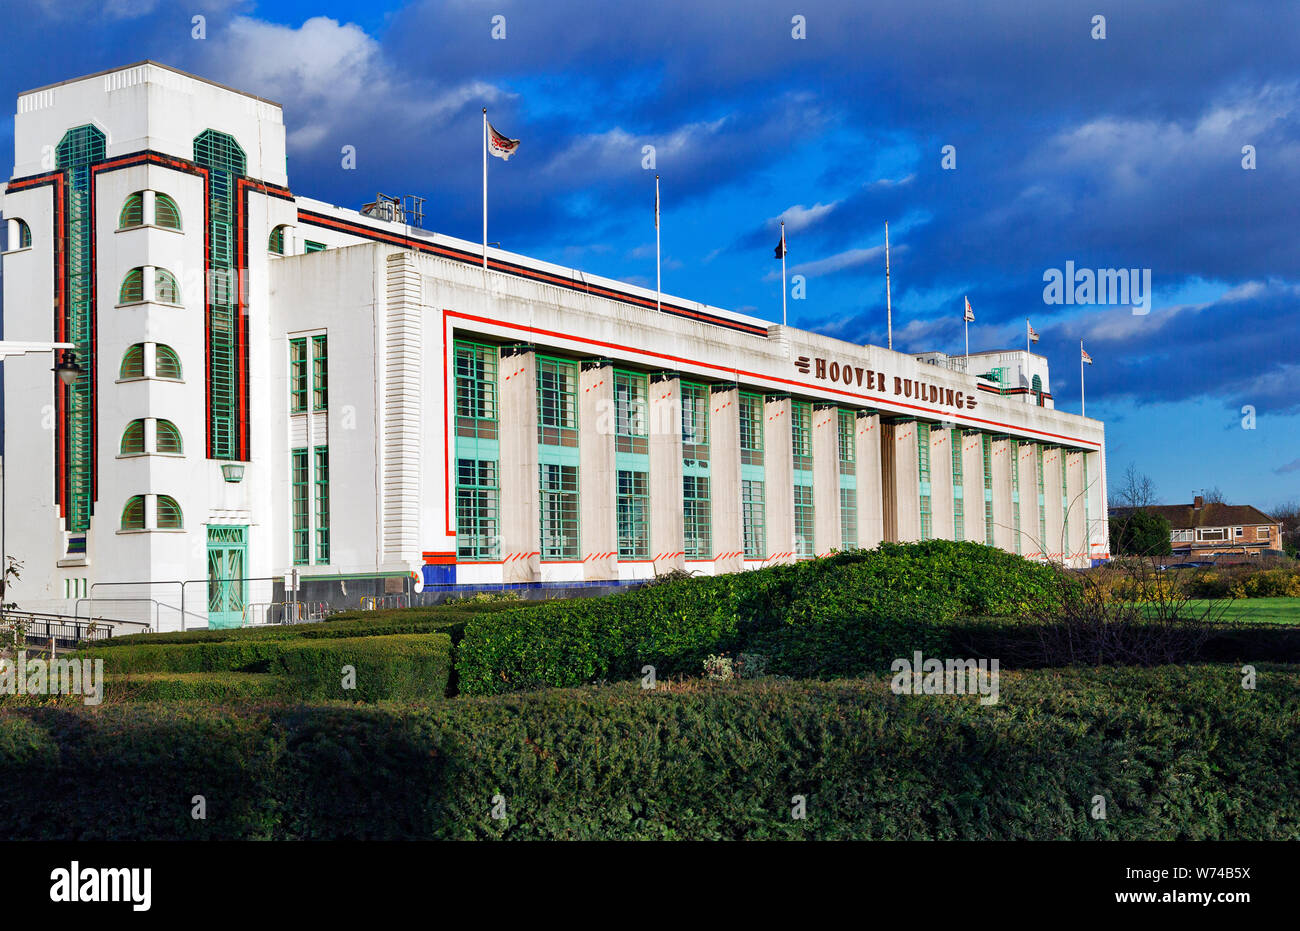 The Hoover Building Grade II listed Art Deco architecture, Western Avenue, Perivale, Greater London, England, UK Stock Photo